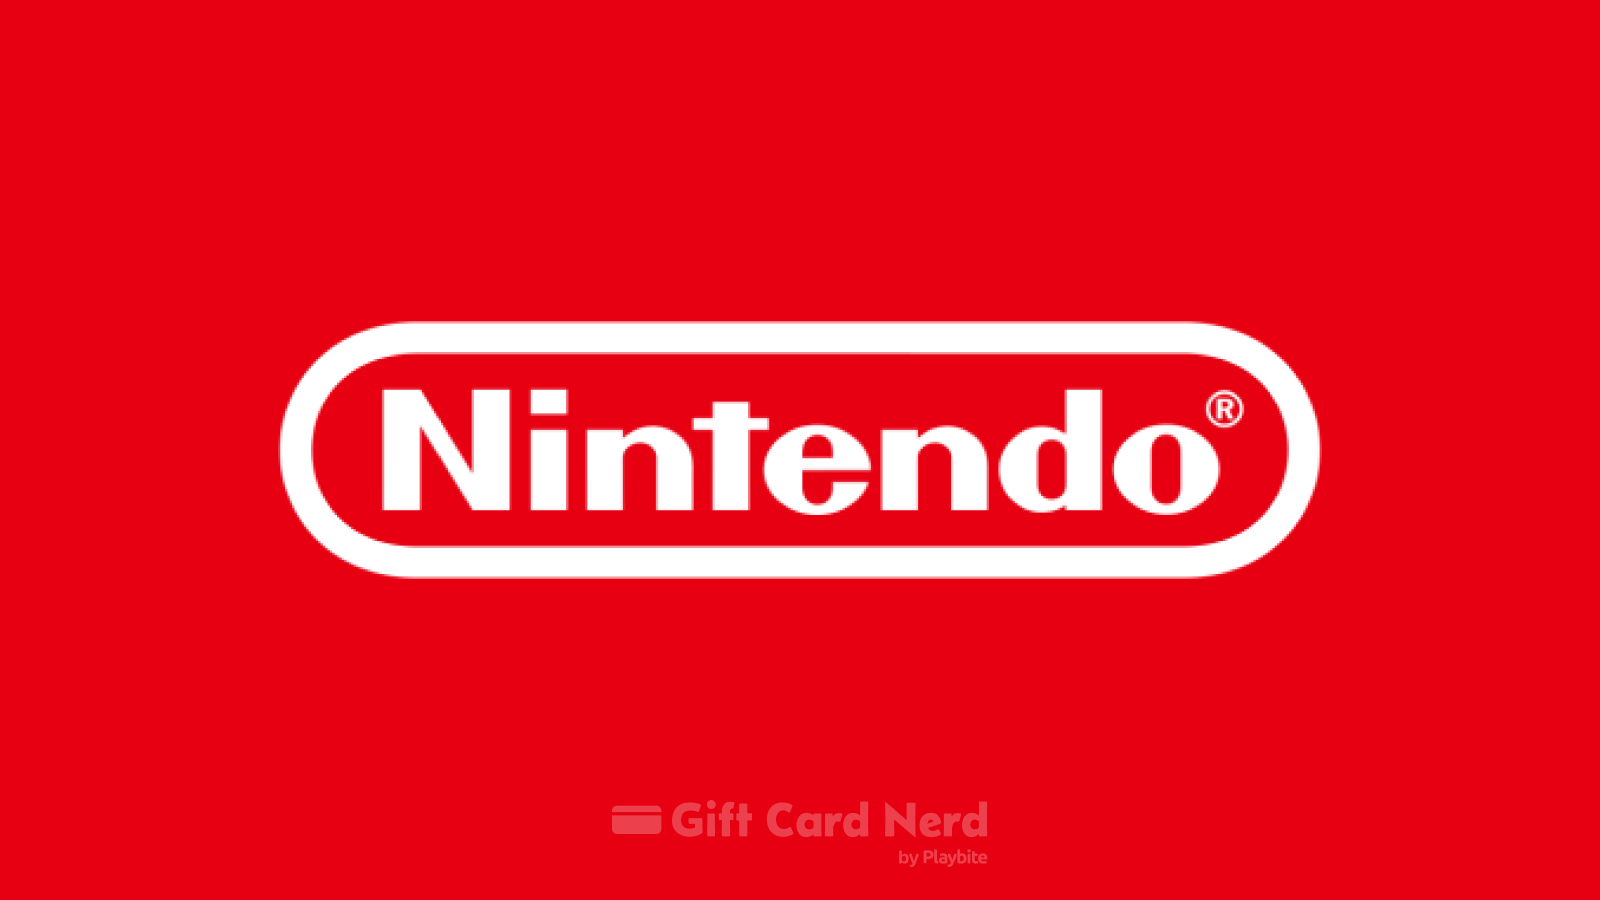 Can I Use a Nintendo Gift Card on Amazon?